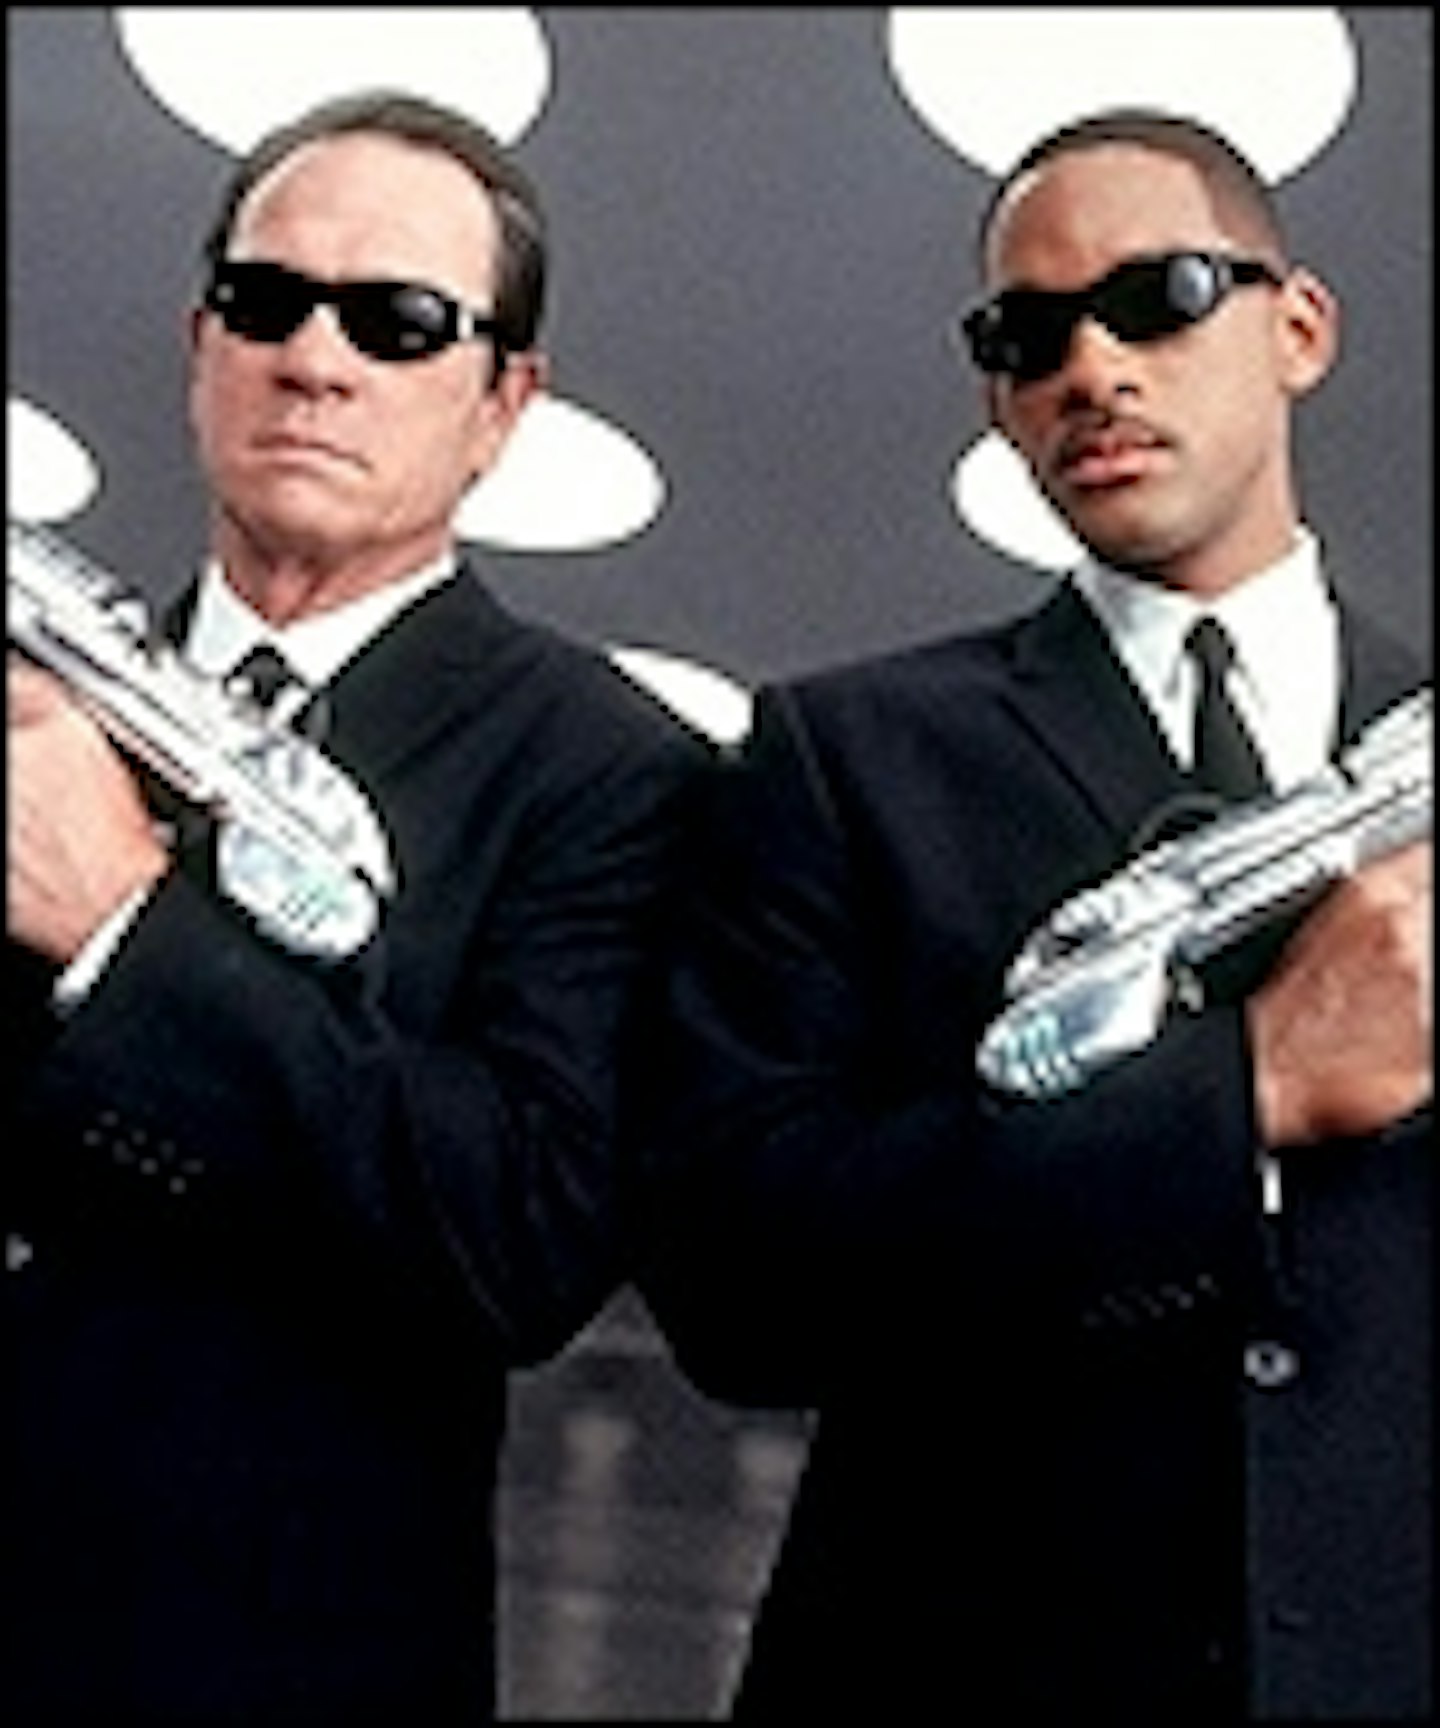 Smith And Jones Confirmed For MIB 3-D